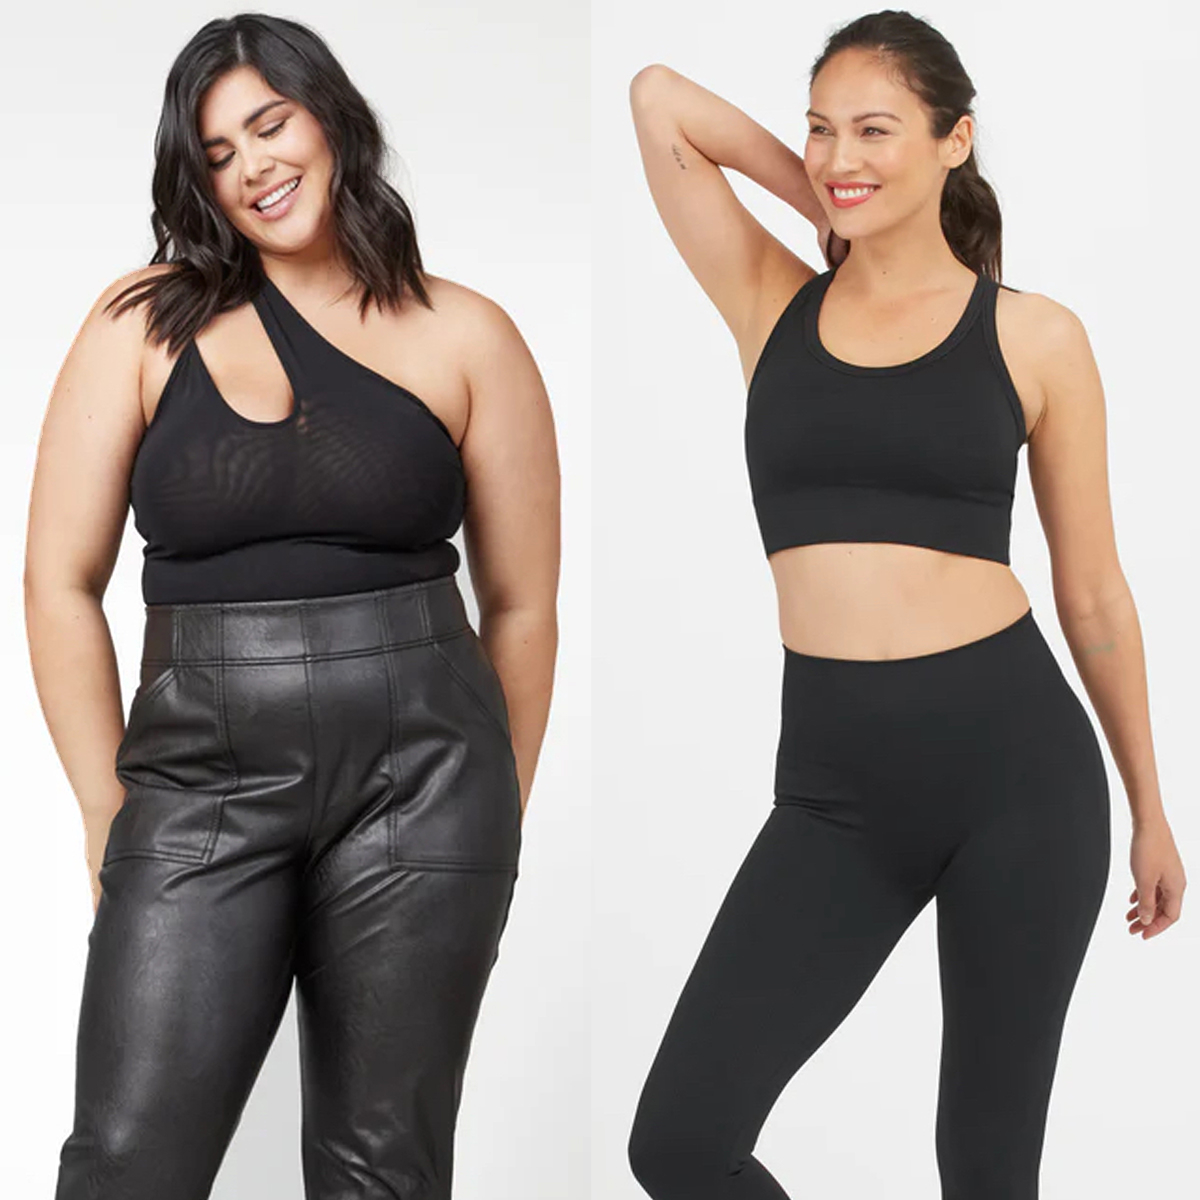 You Only Have a Few Hours Left to Shop These Spanx 50% Off Deals